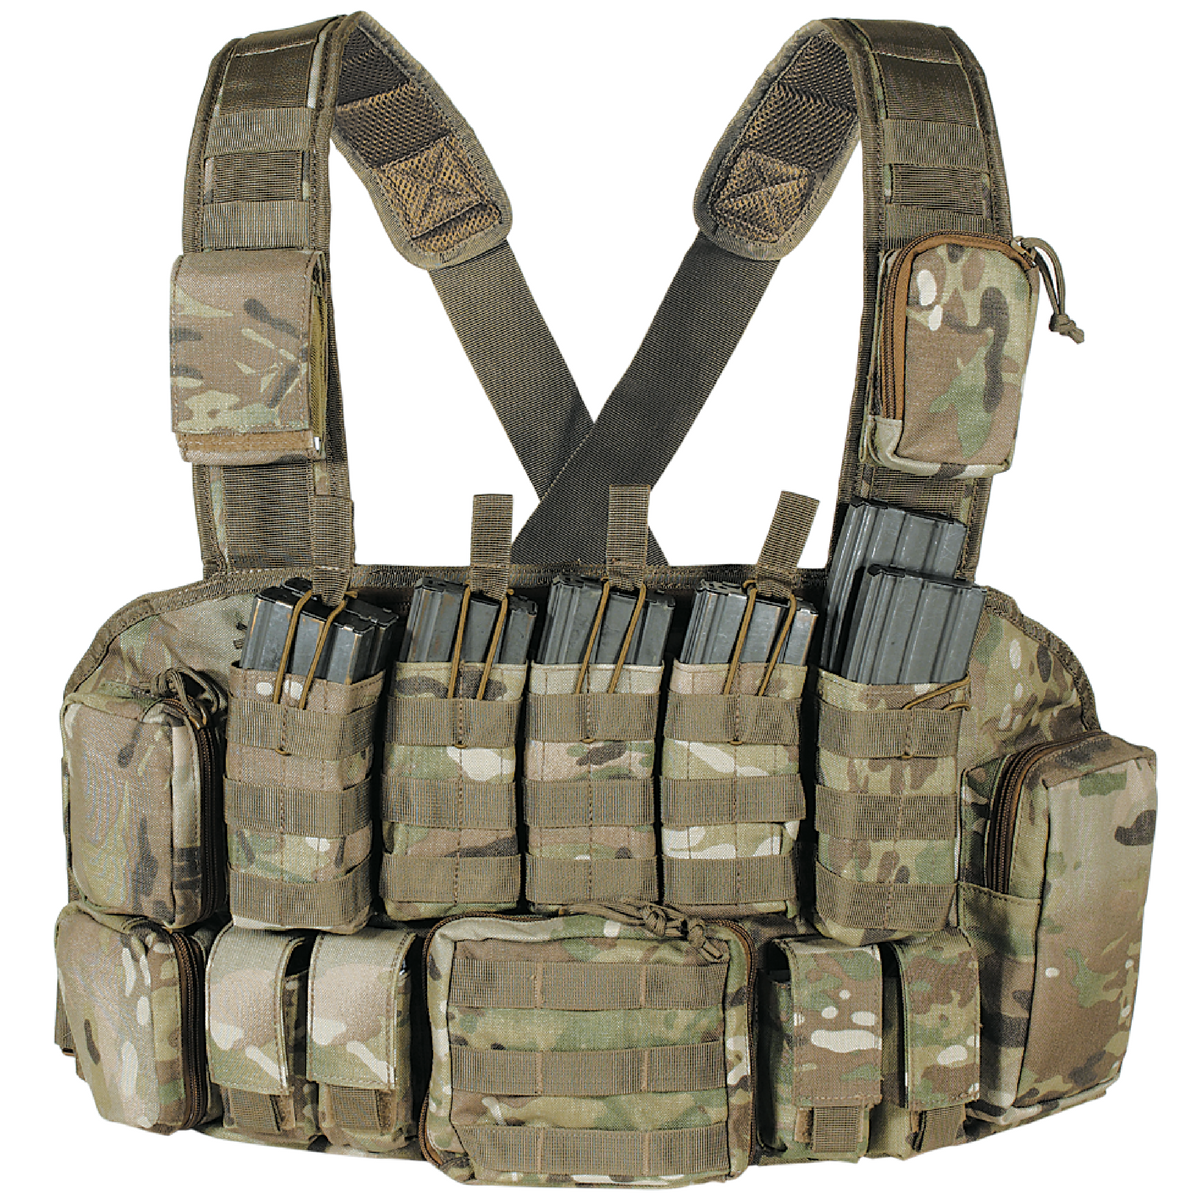 X-Strap Chest Rig – Outdoor King